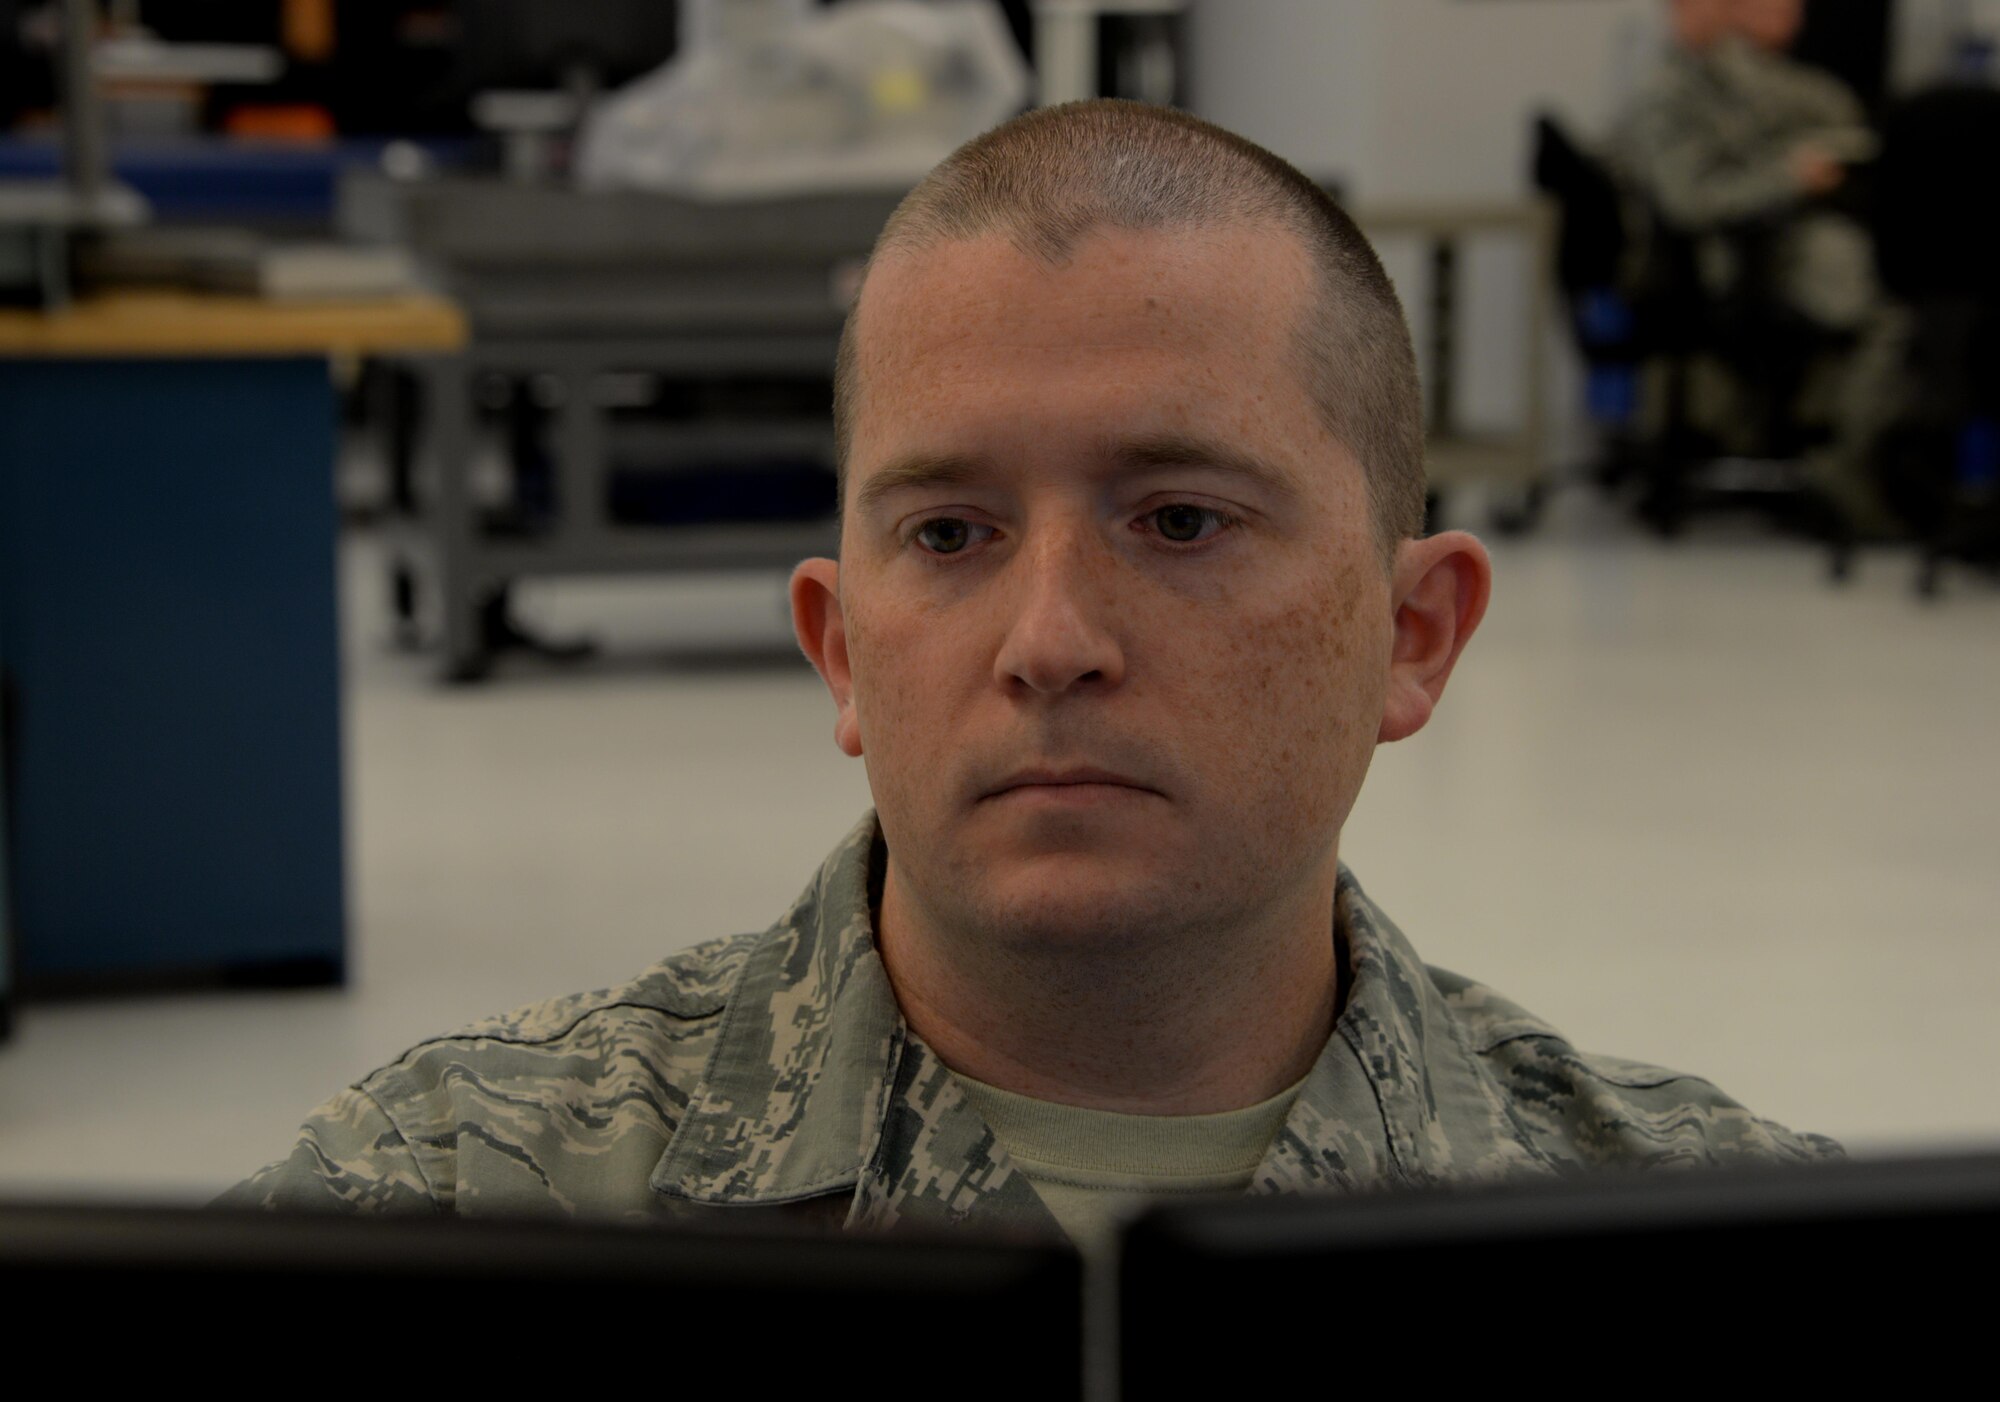 Staff Sgt. Timothy Gould, 60th Maintenance Squadron precision measurement equipment laboratory technician from Buffalo, New York, reviews a report on his computer at Travis Air Force Base, Calif., Sept. 27, 2016. The Travis PMEL team conducts about 12,000 calibrations a year and supports units at 15 bases. (U.S. Air Force photo/Tech. Sgt. James Hodgman)